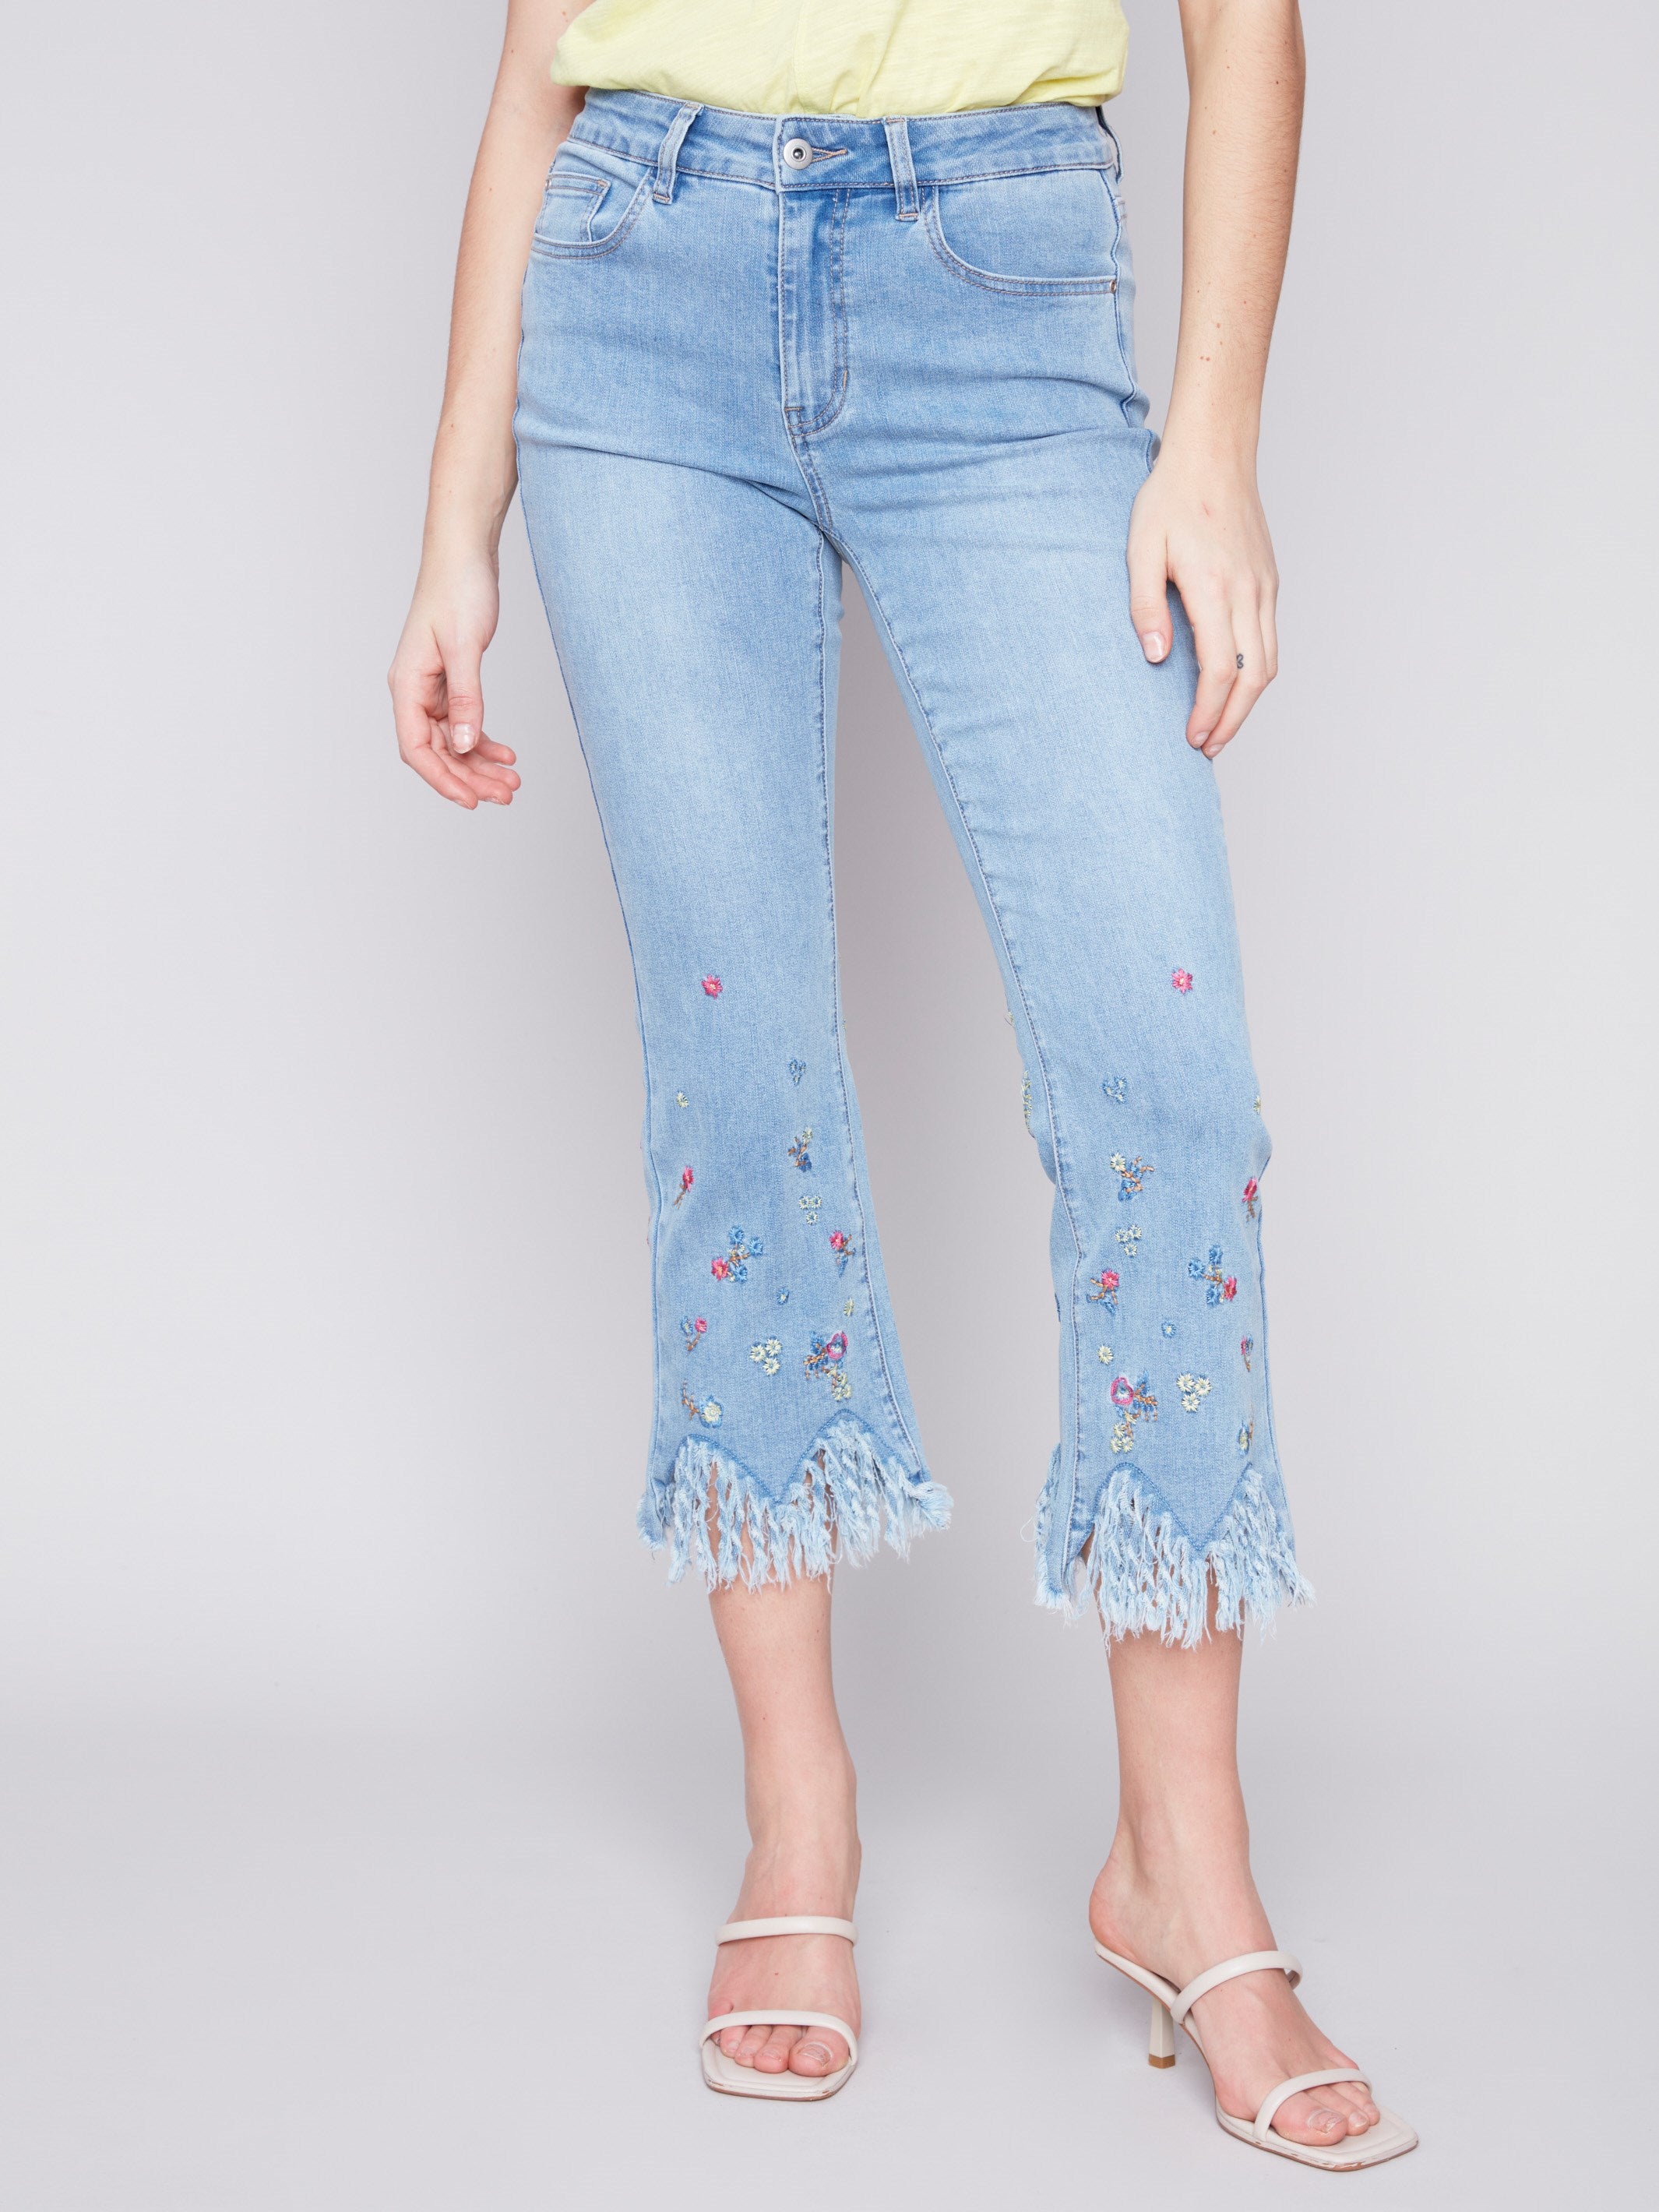 Cropped Jeans with Embroidered Fringed Hem - Light Blue - Charlie B Collection Canada - Image 2